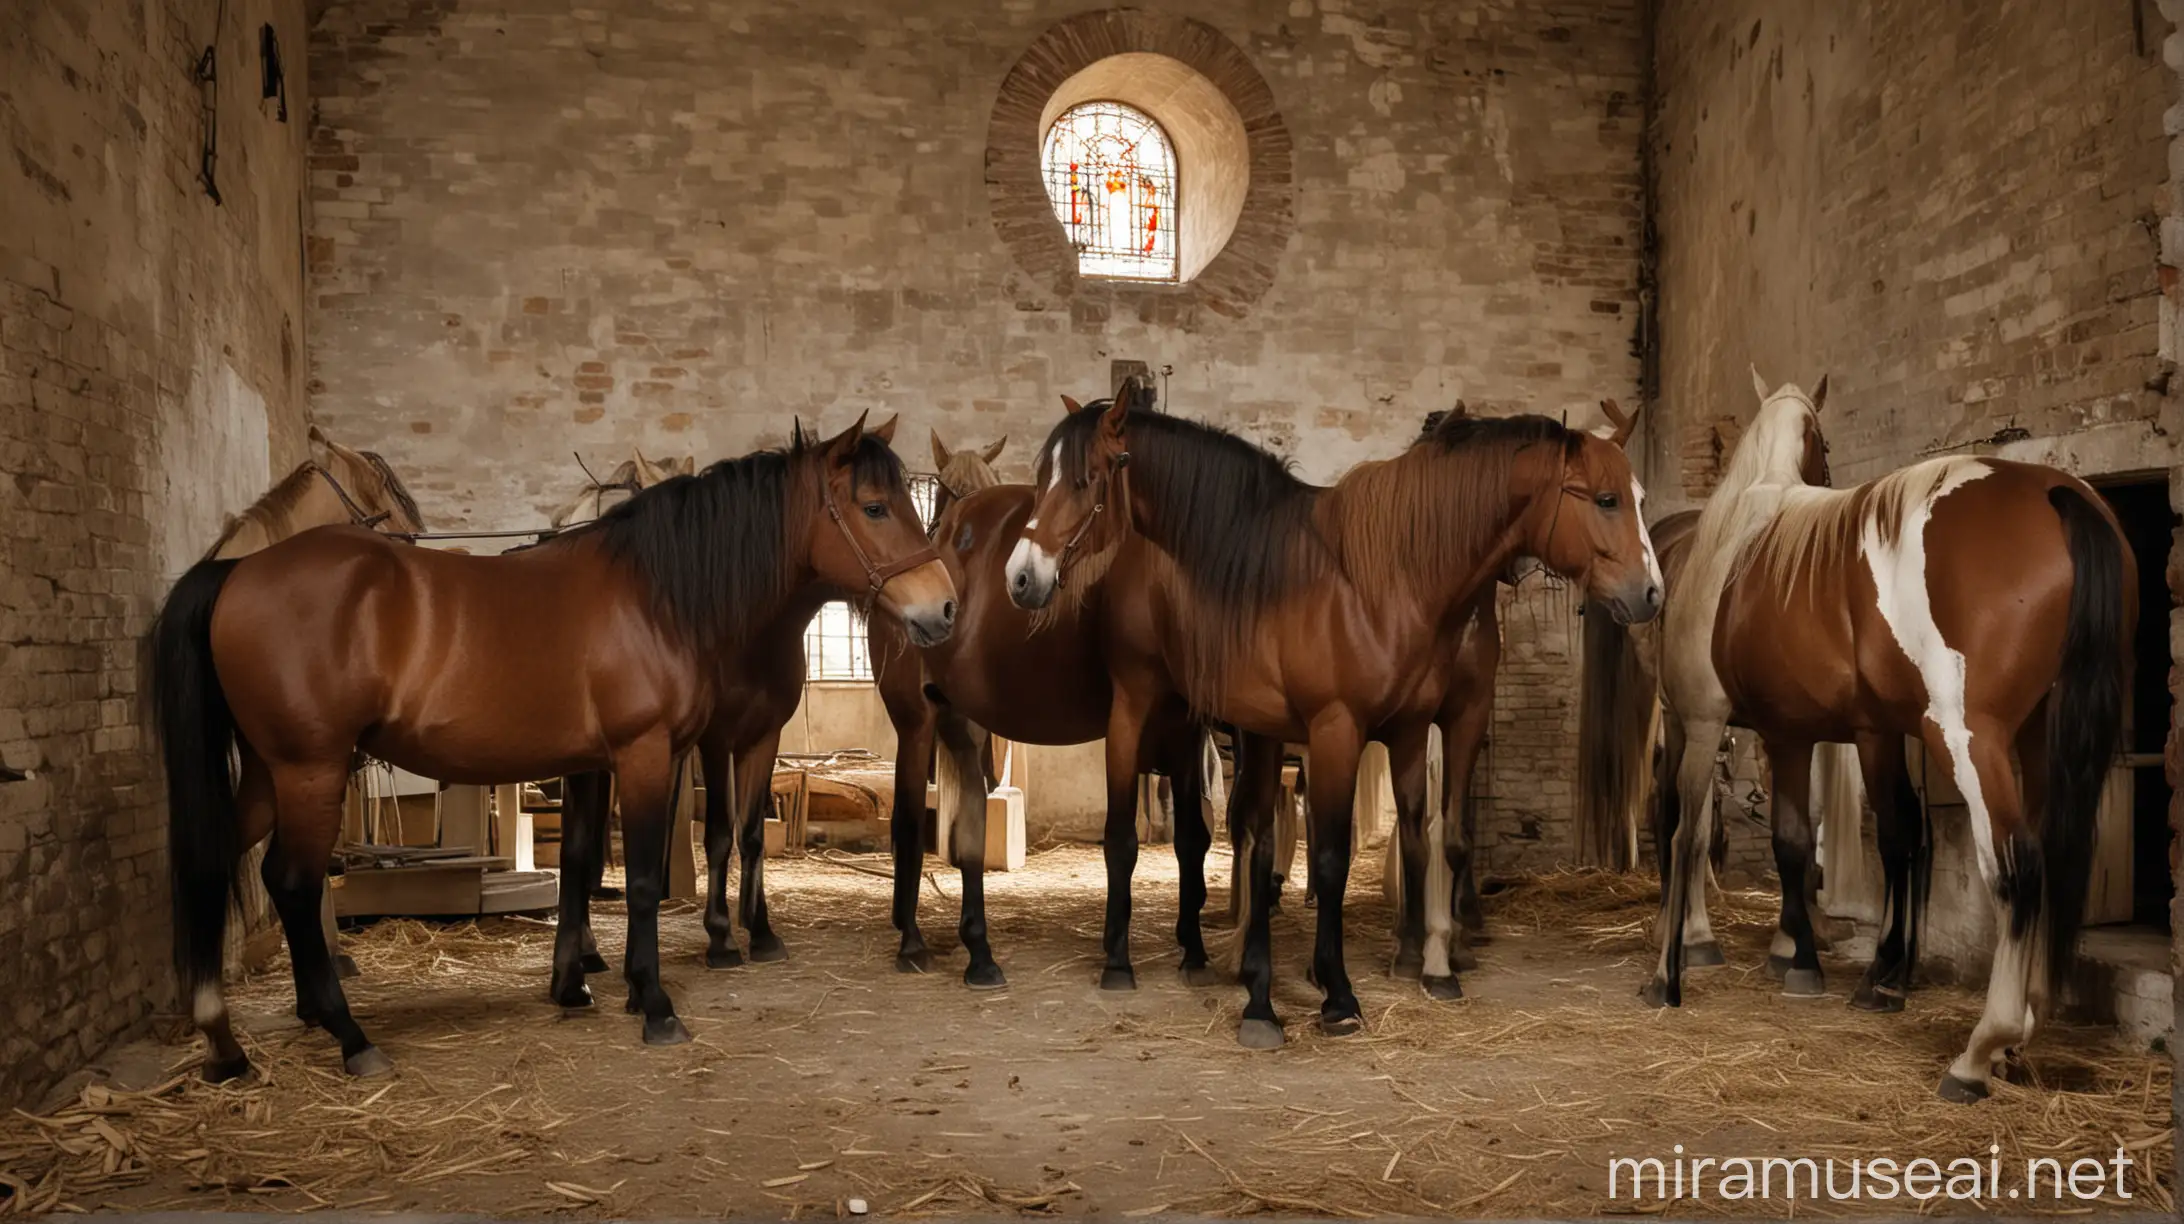 Several horses as if they were inside a stable in a 19th century Catholic church in Italy.